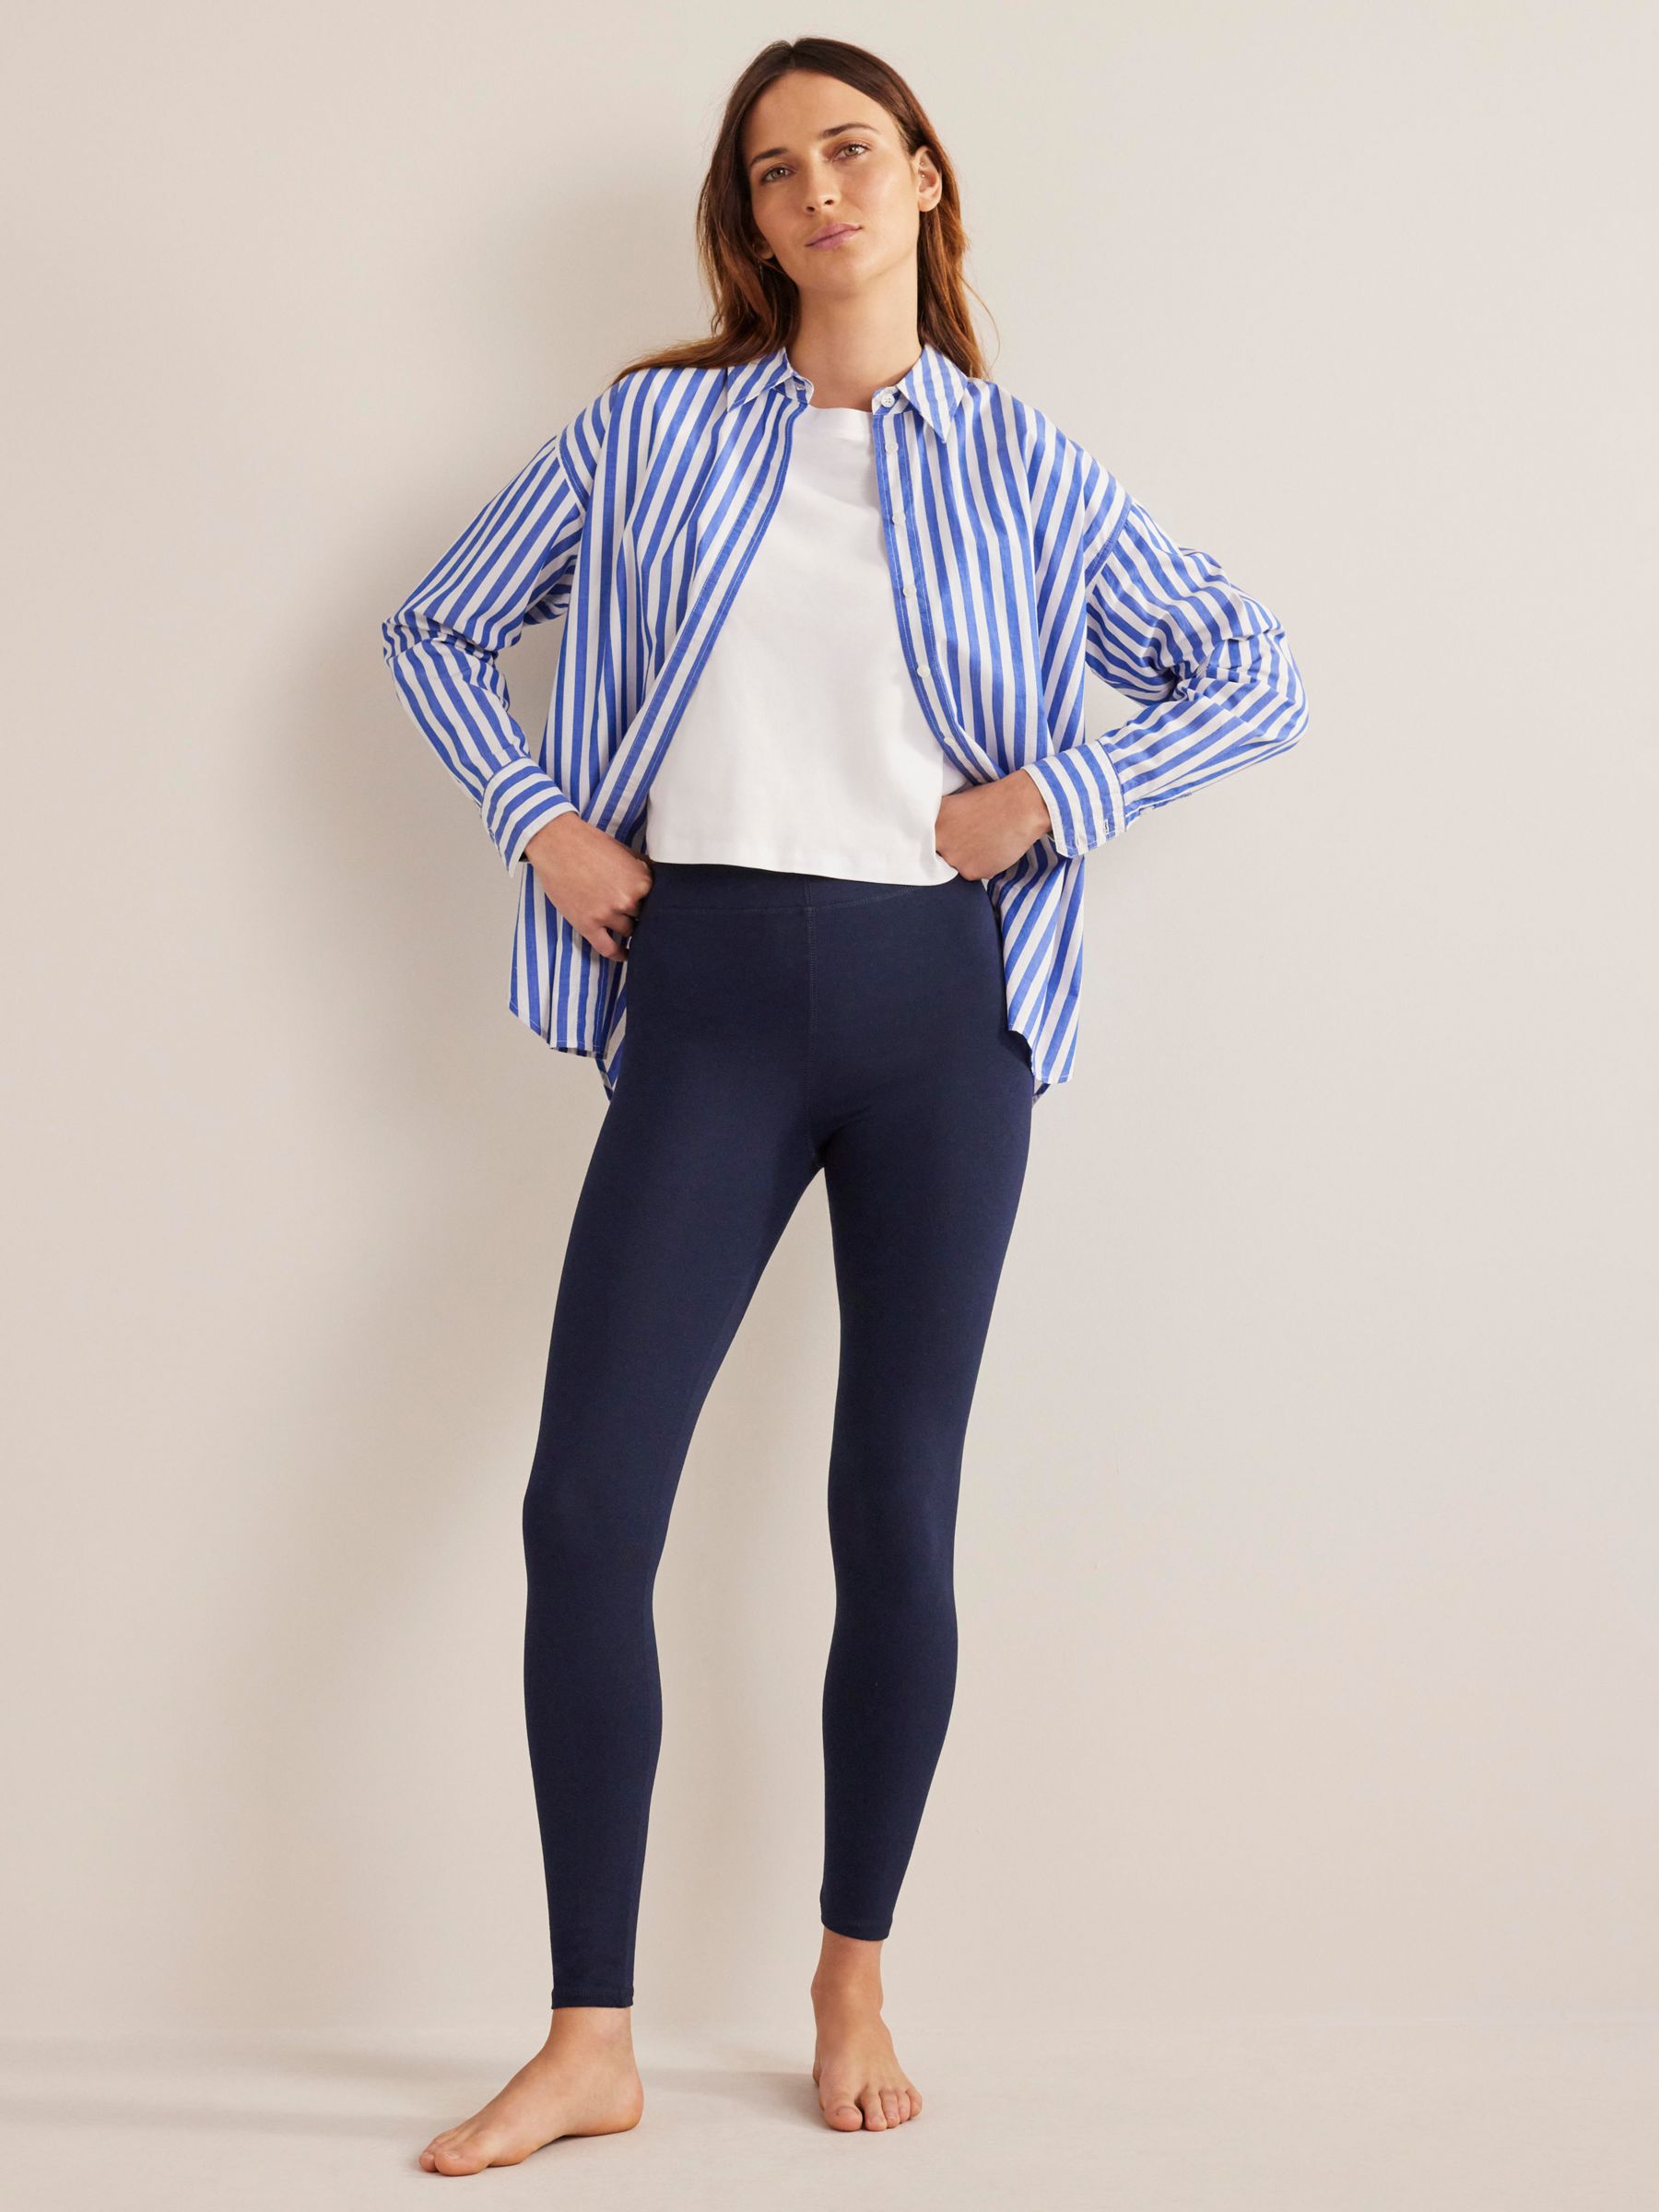 Stretch Jean Look Leggings- Blue — Camp Willow